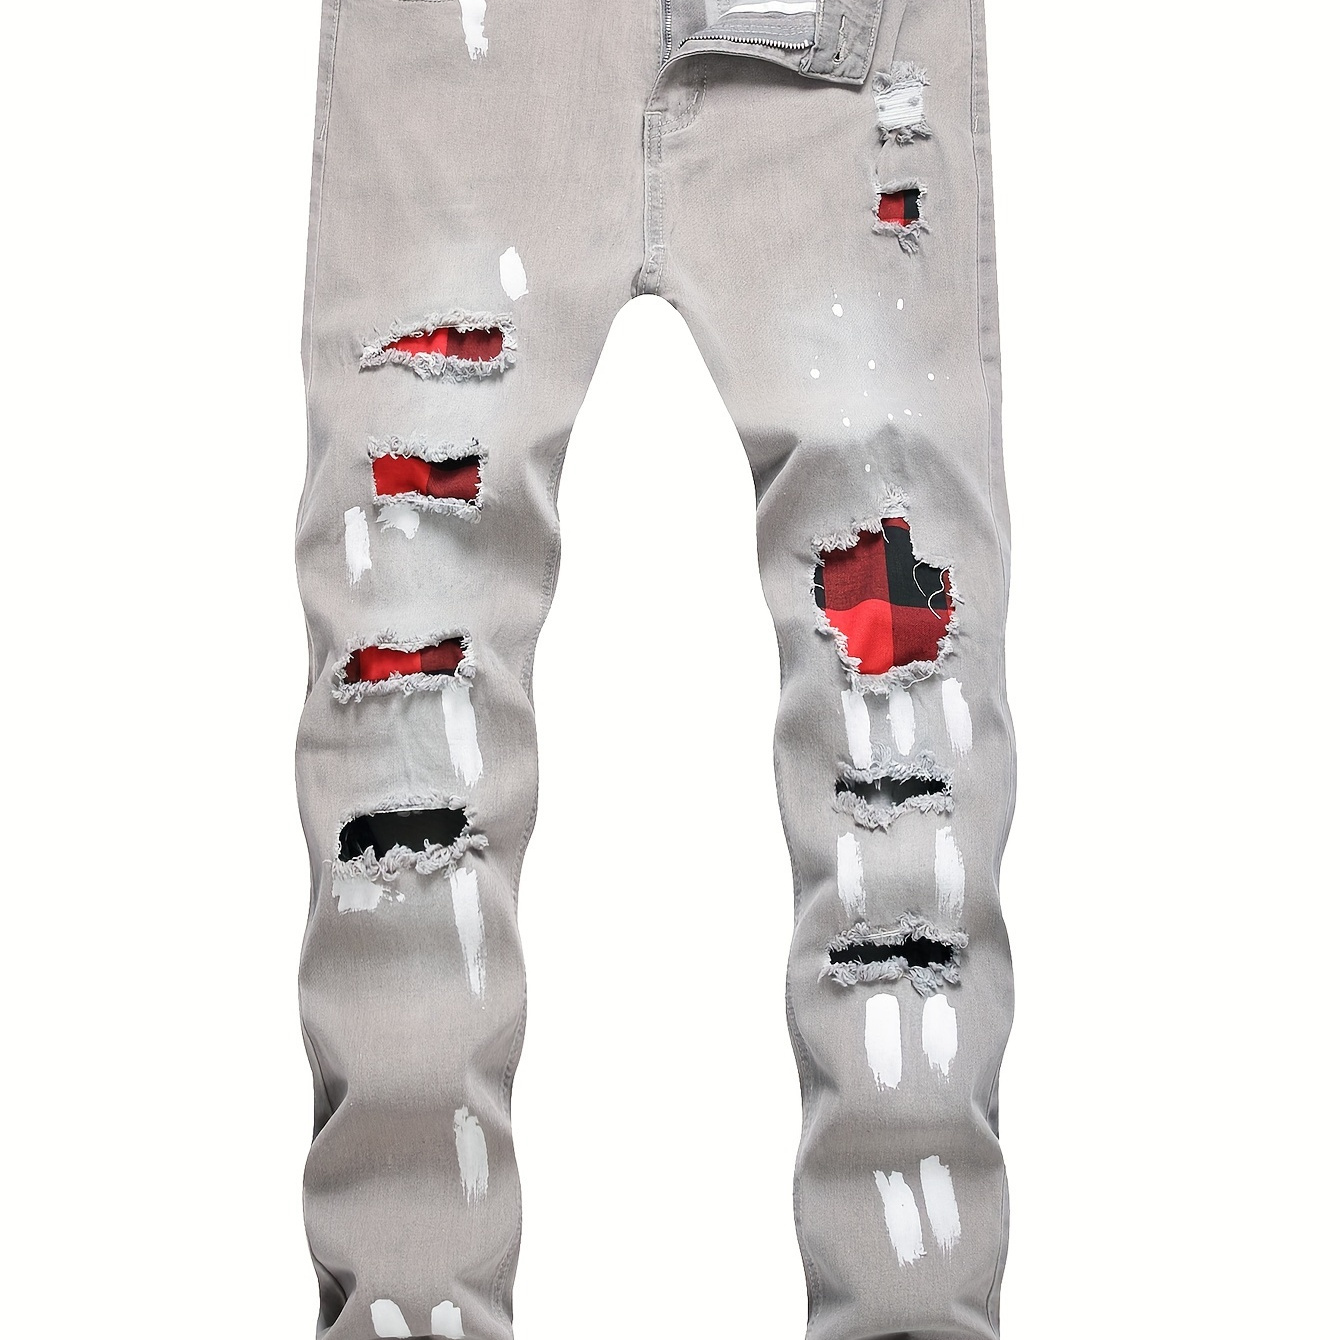 

Paint Splatter Plaid Ripped Jeans, Men's Casual Street Style Straight Leg Distressed Slightly Stretch Cotton Blend Denim Pants For Spring Summer